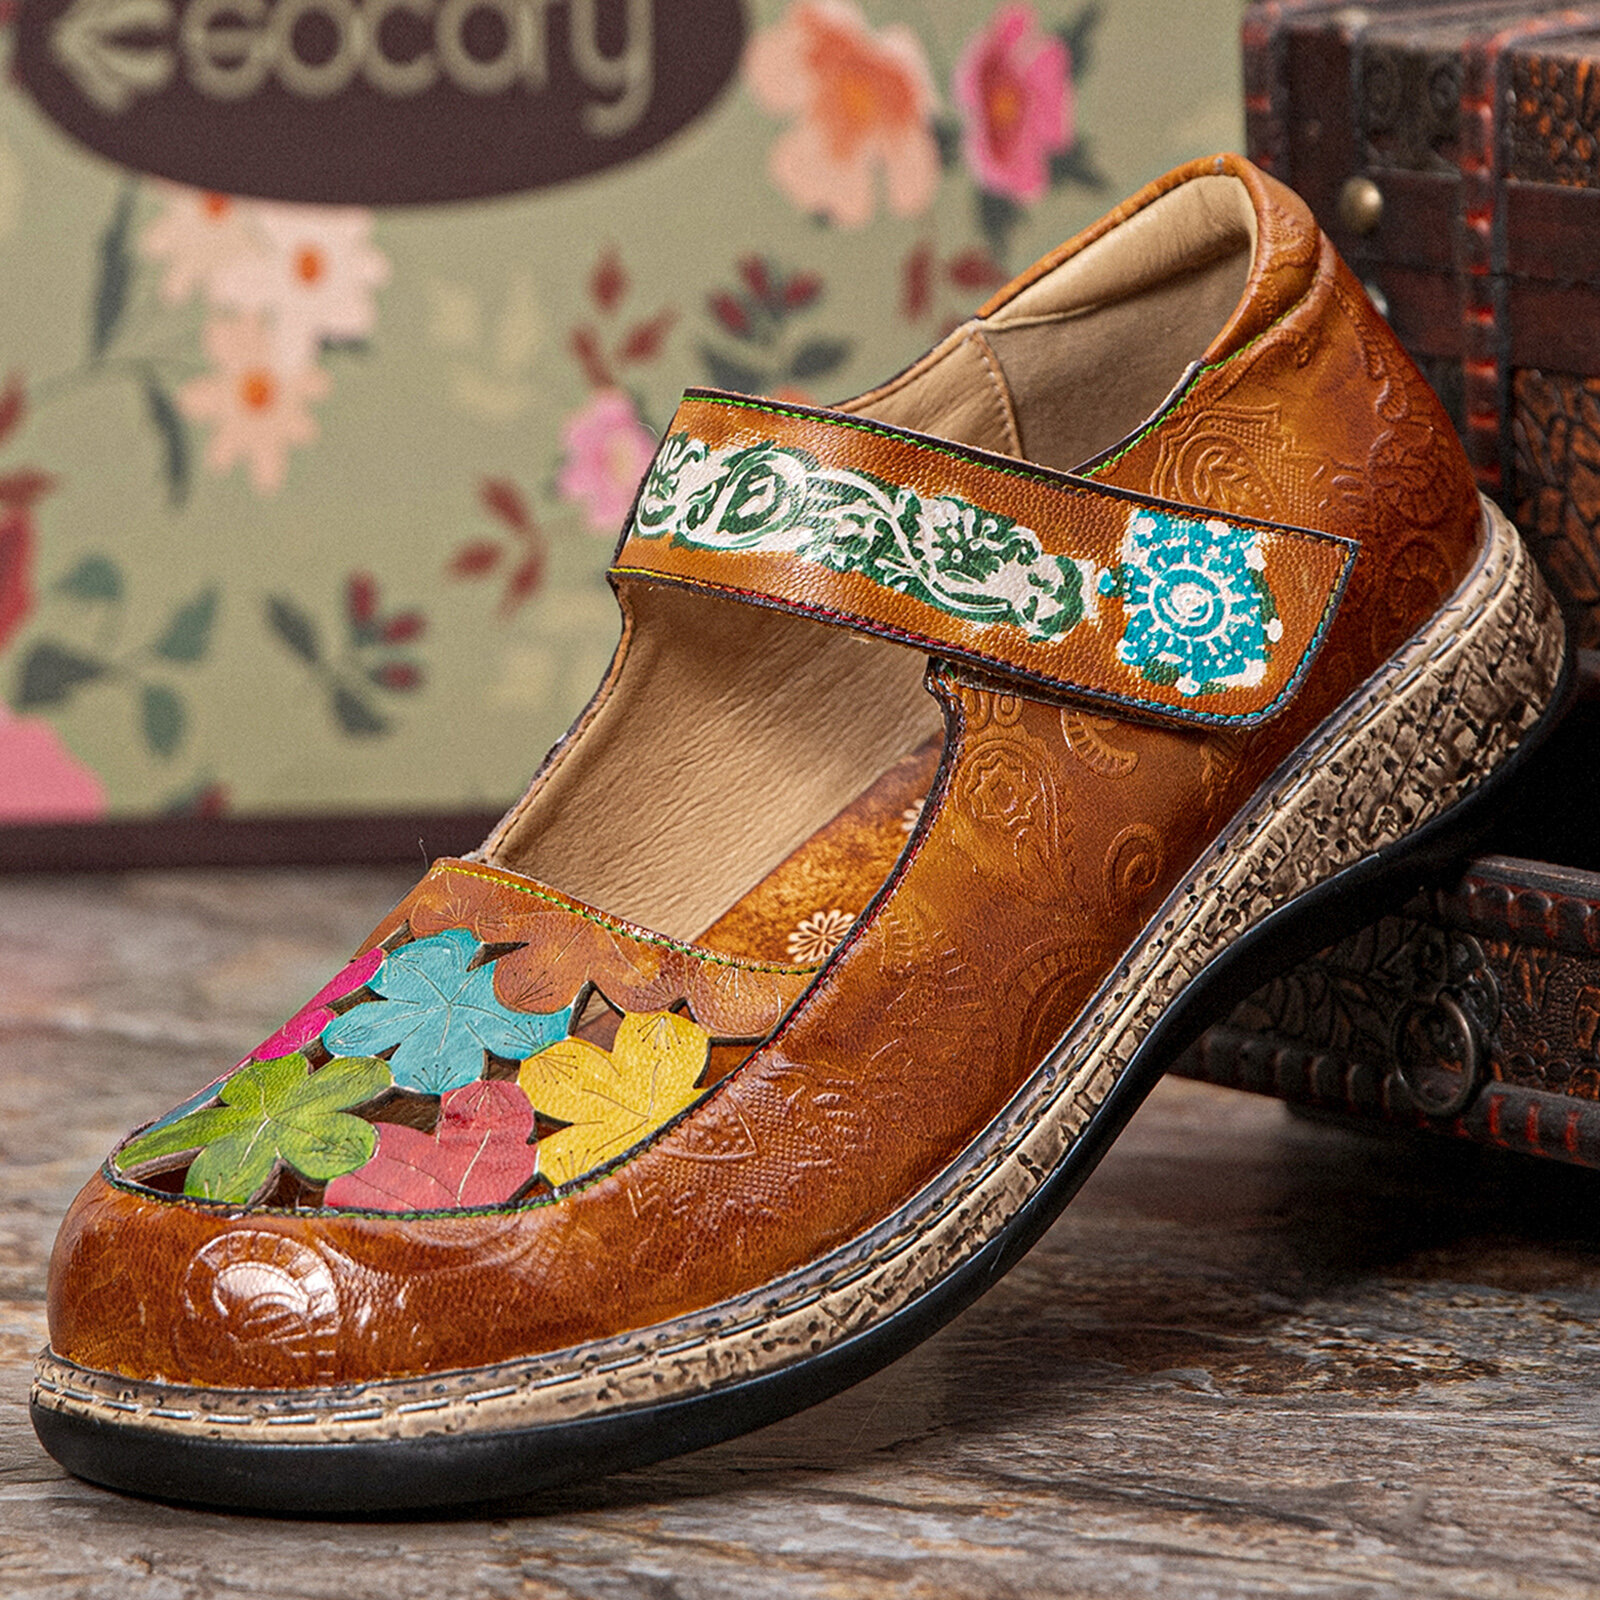 Socofy Genuine Leather Hand Made Retro Ethnic Colorful Flowers Hollow Soft Comfy Mary Jane Flat Shoe